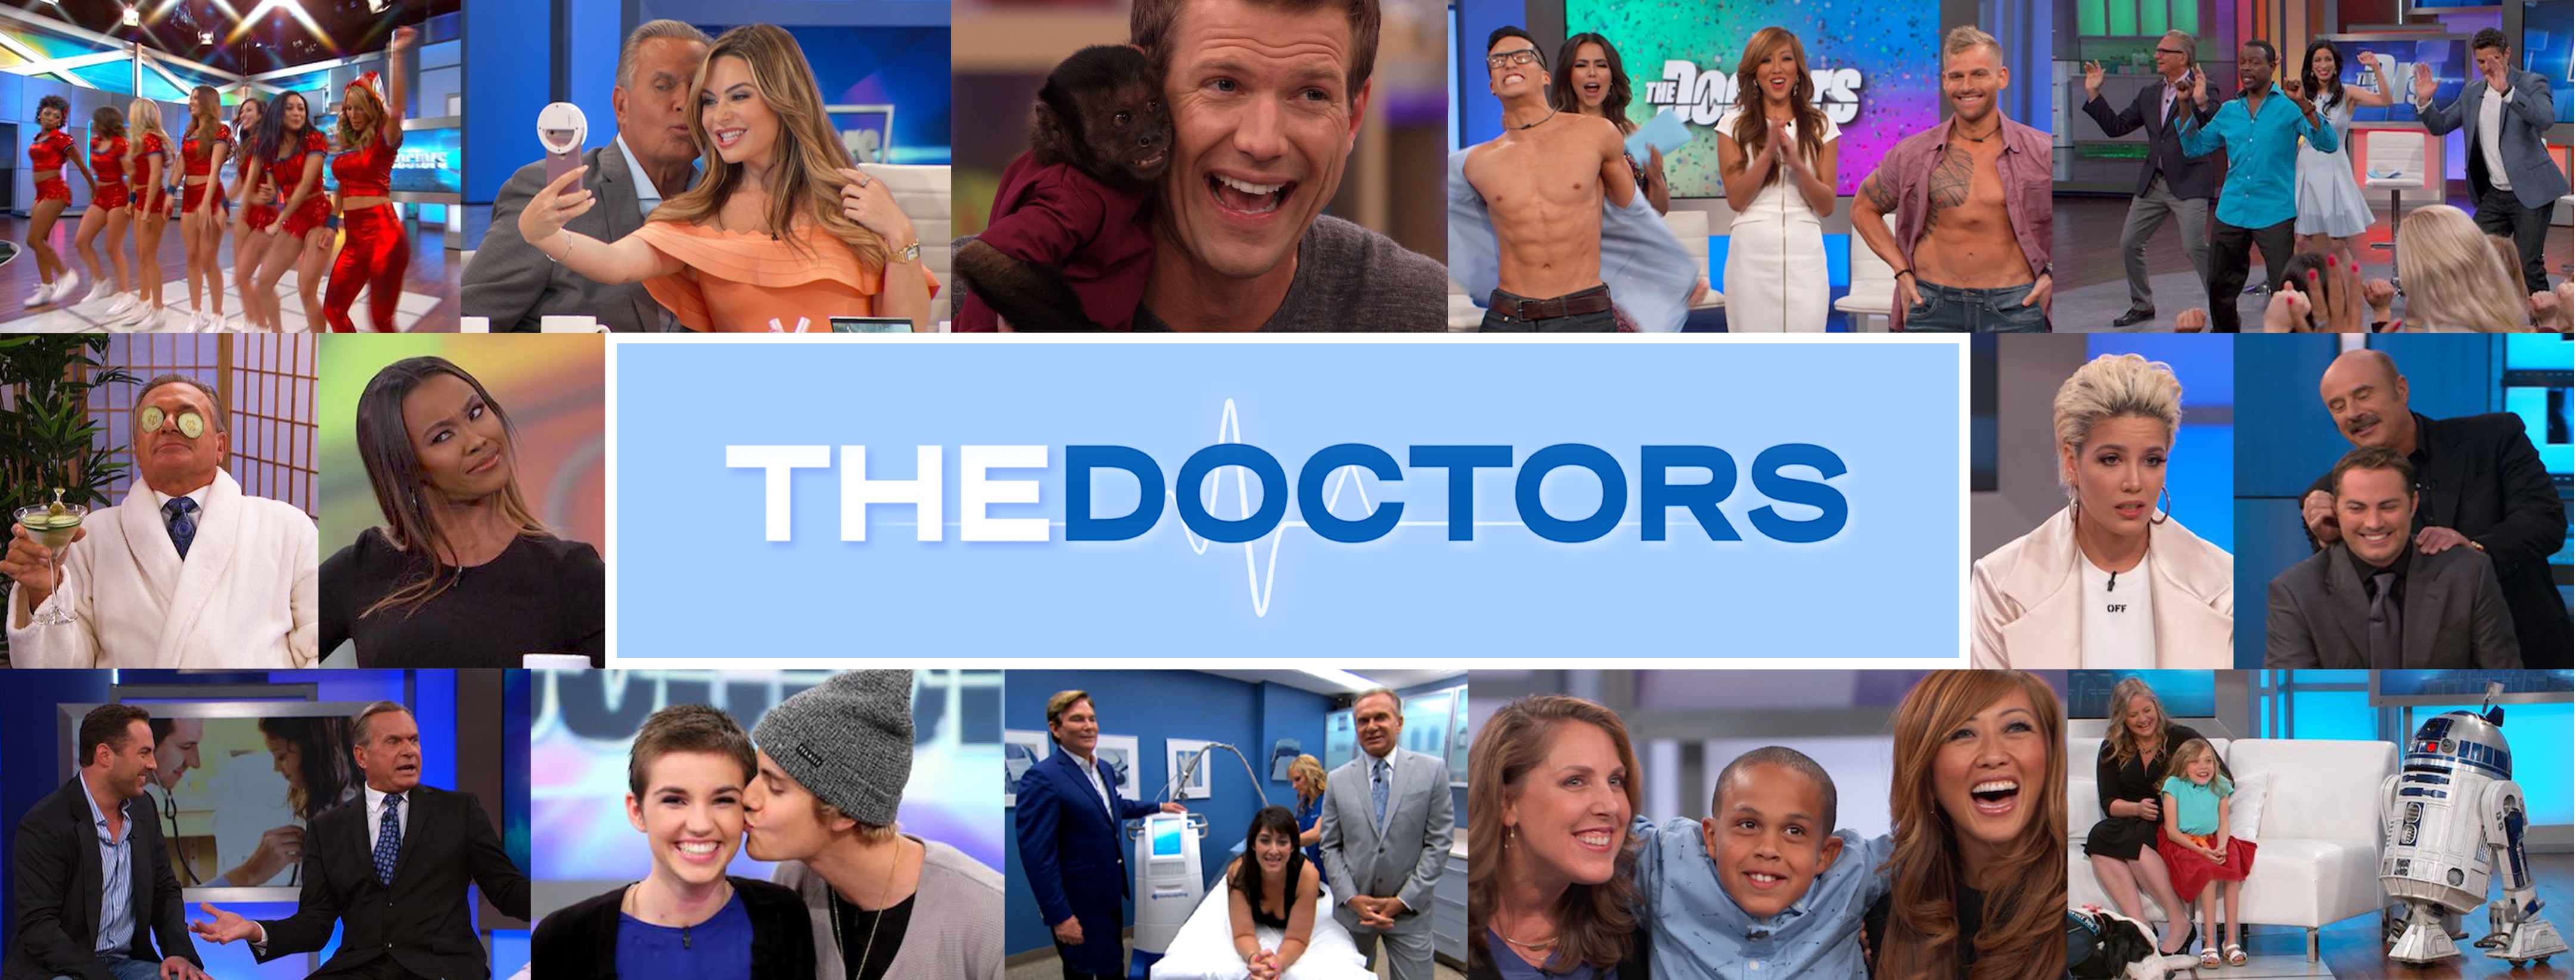 Body Parts You Can Live Without! | The Doctors TV Show